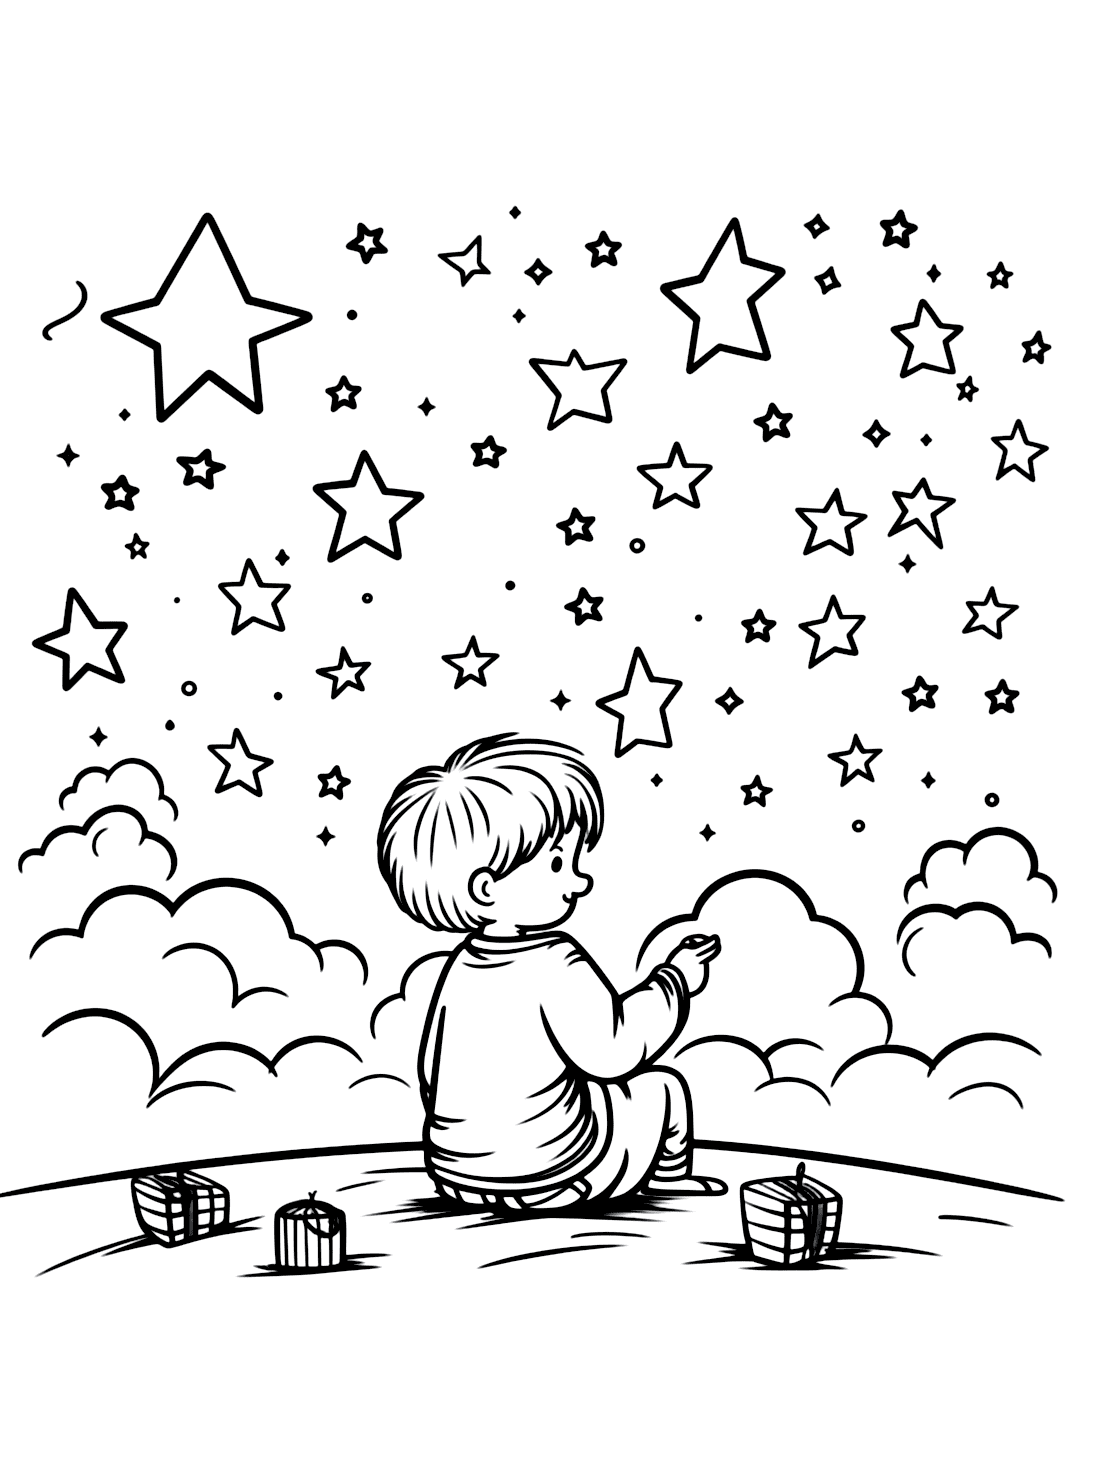 Sky and weather coloring pages